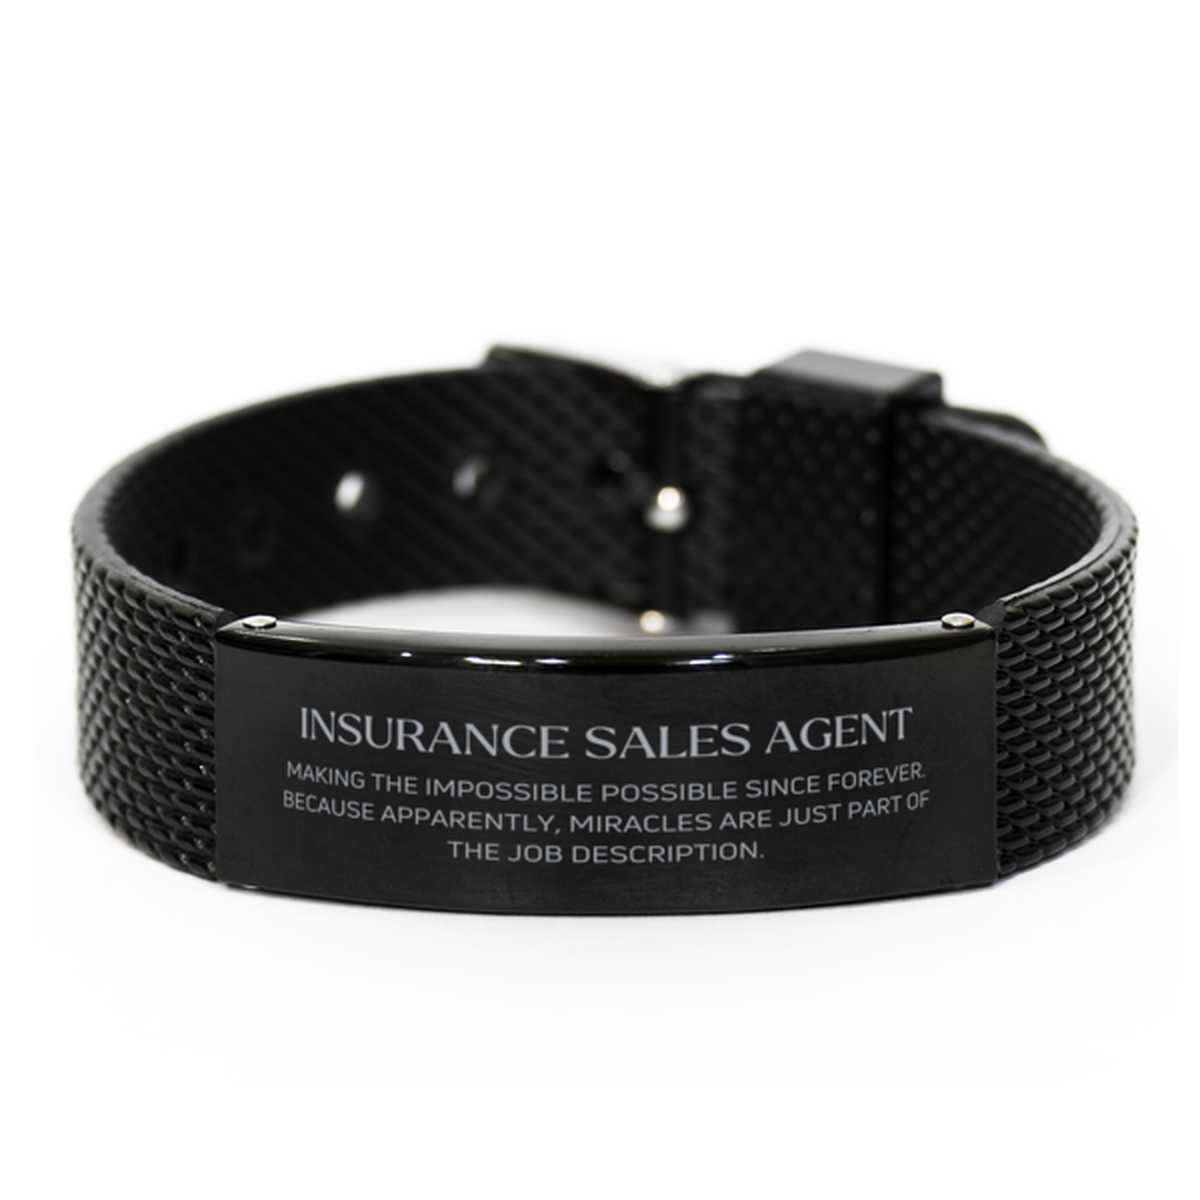 Funny Insurance Sales Agent Gifts, Miracles are just part of the job description, Inspirational Birthday Black Shark Mesh Bracelet For Insurance Sales Agent, Men, Women, Coworkers, Friends, Boss